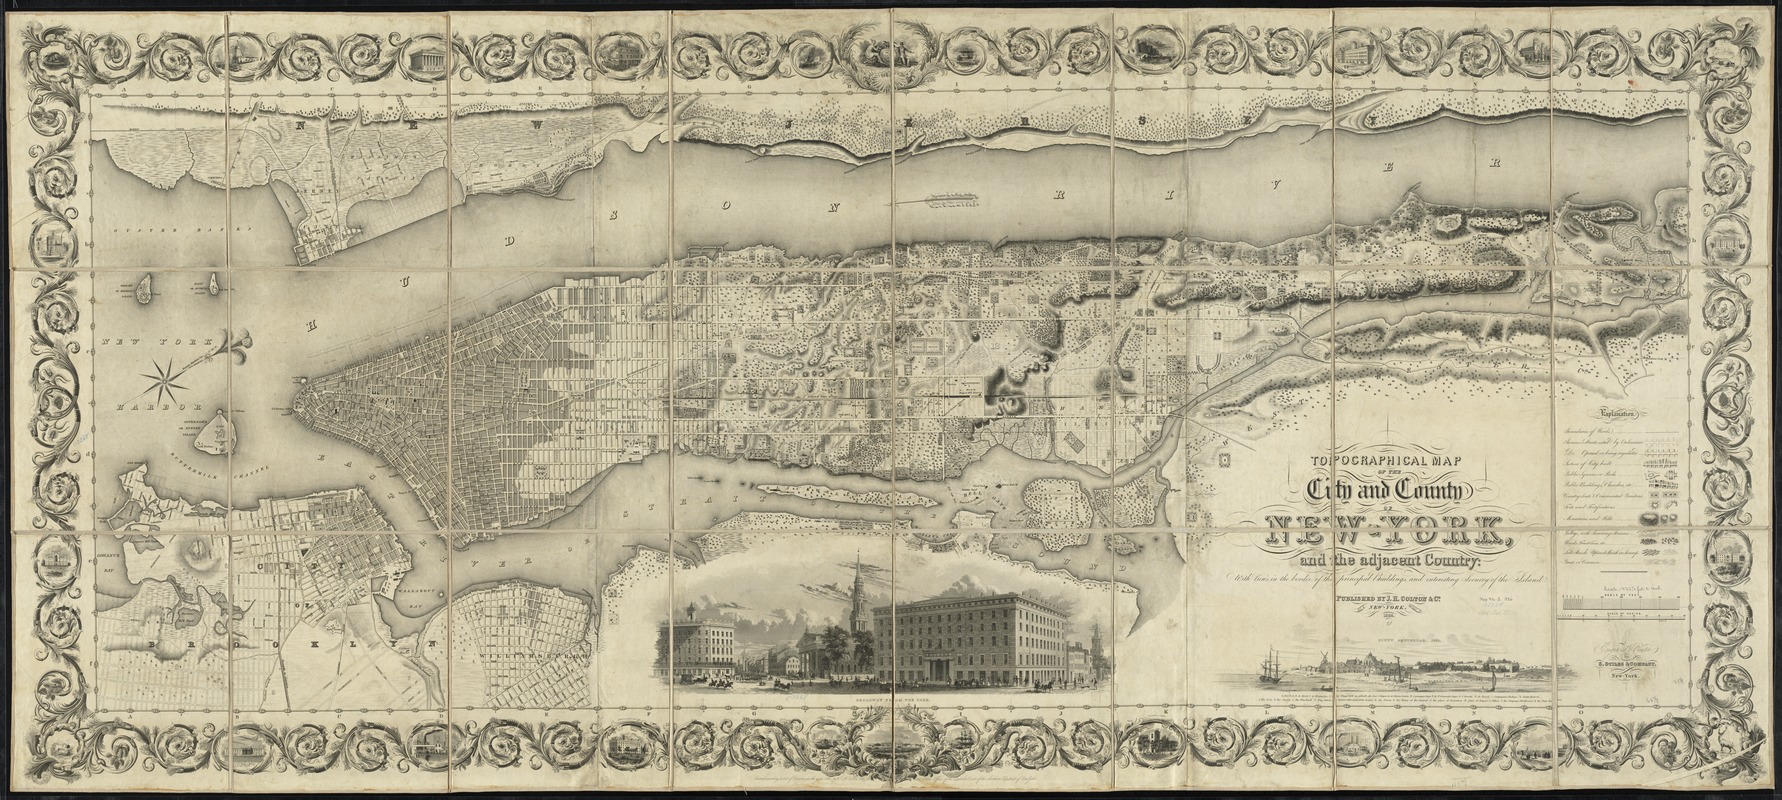 Topographical map of the City and County of New-York, and the adjacent country